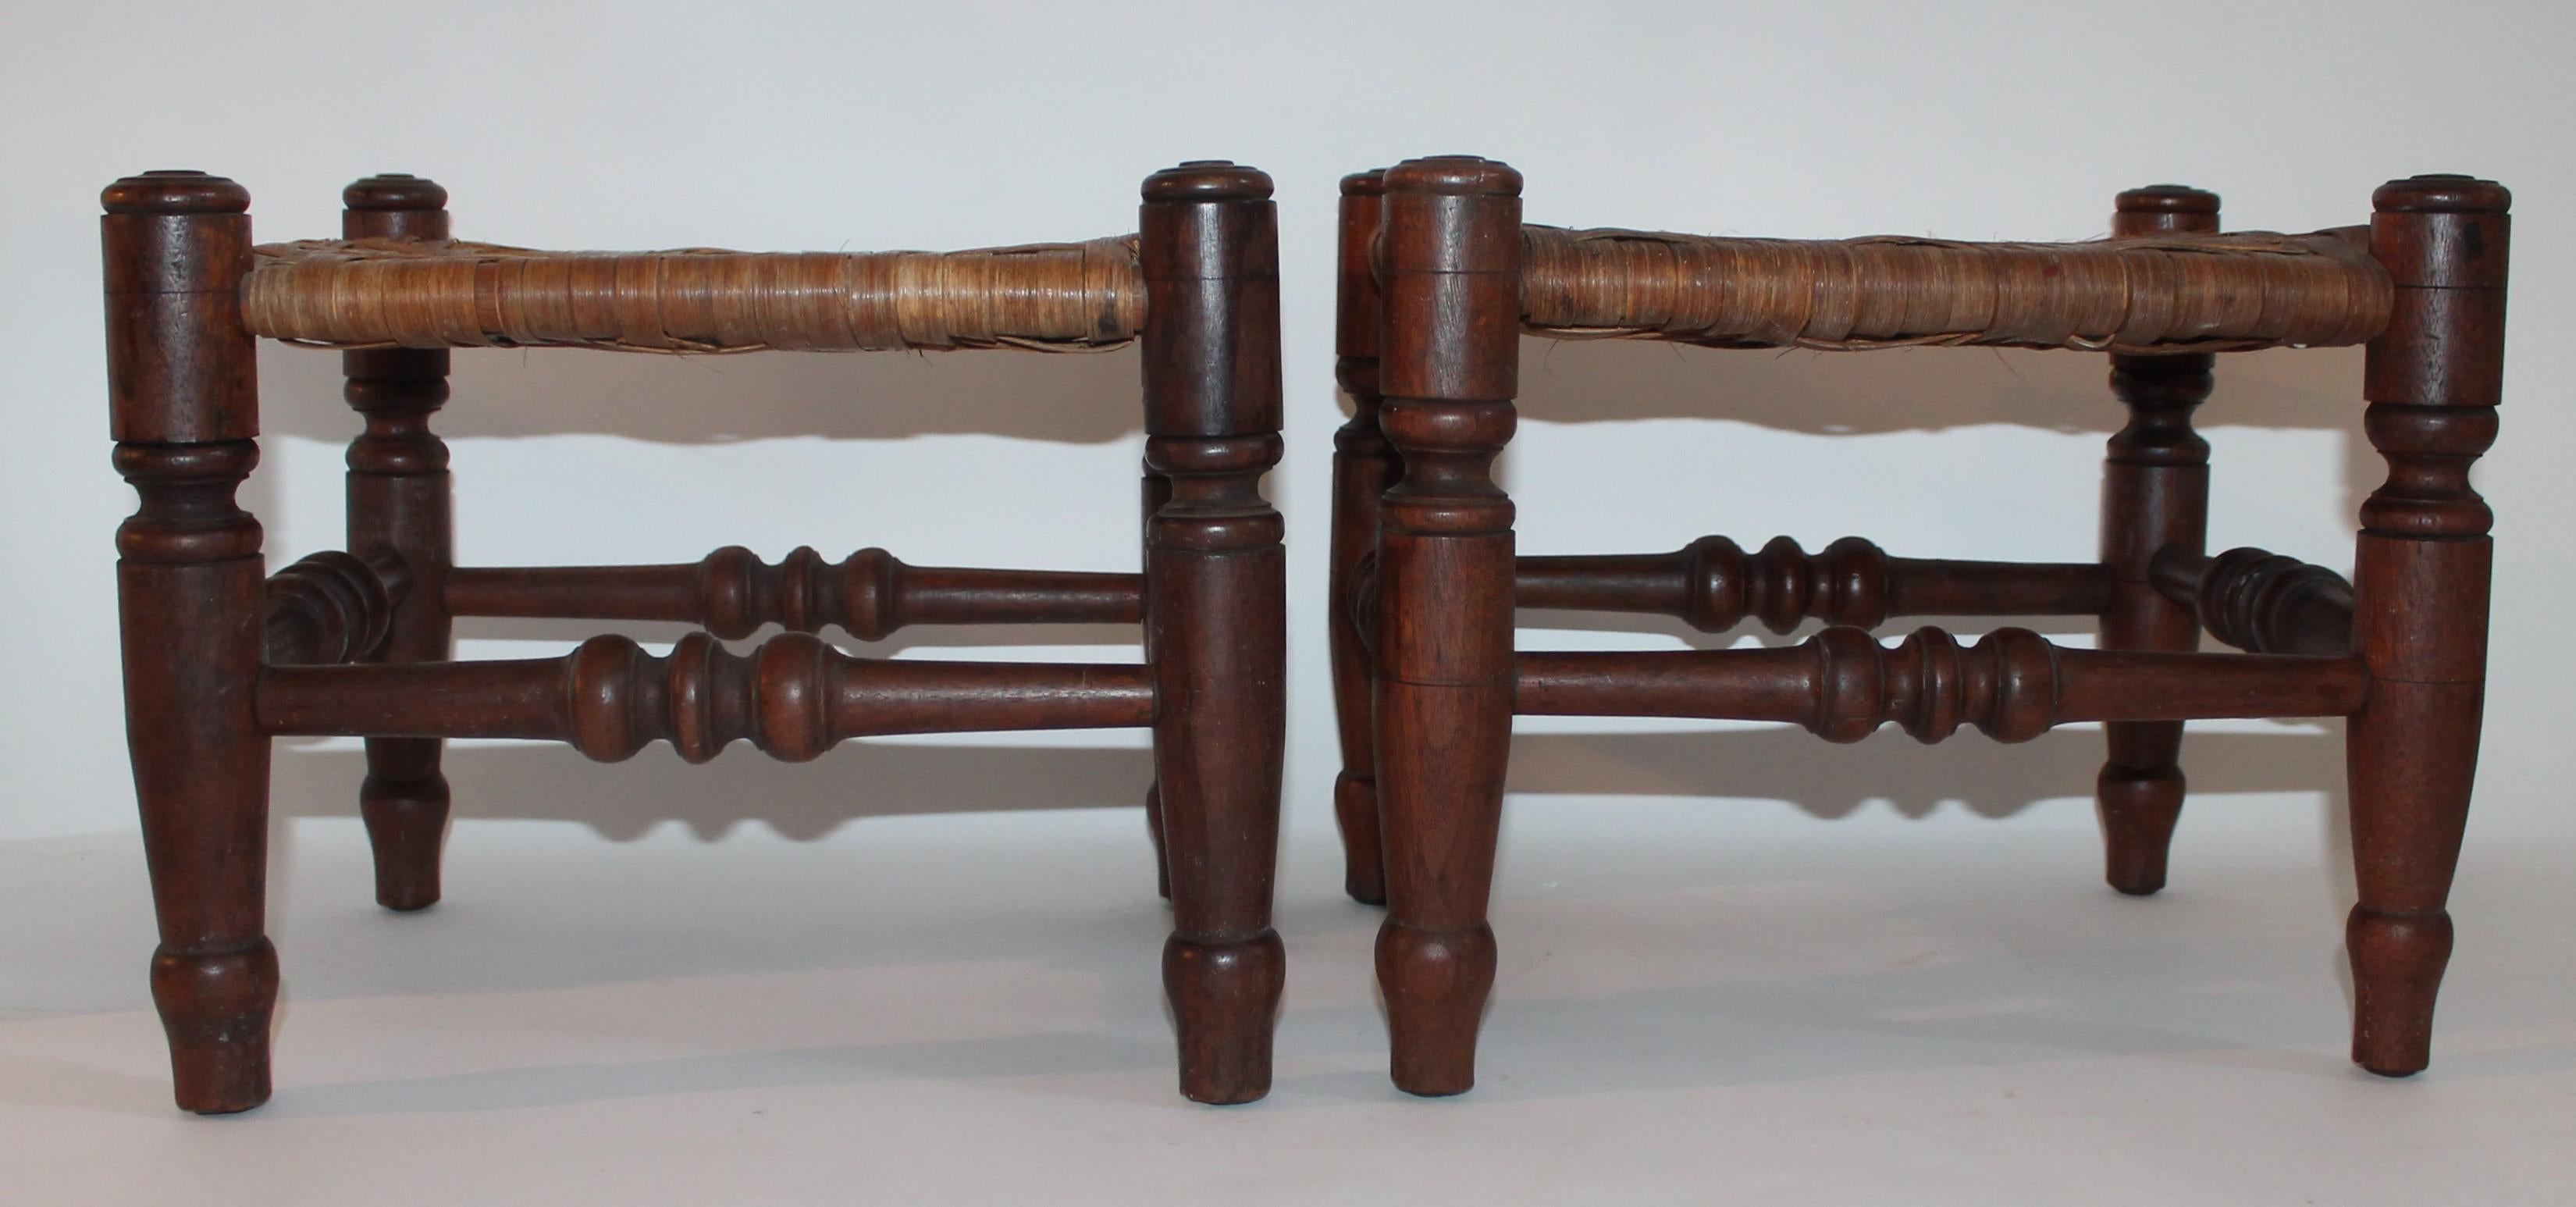 These amazing and very early 19th century hand carved from Pennsylvania foot stools are in Fine condition. These early 19th century stools are in fine condition. Sold as a perfect matched pair.